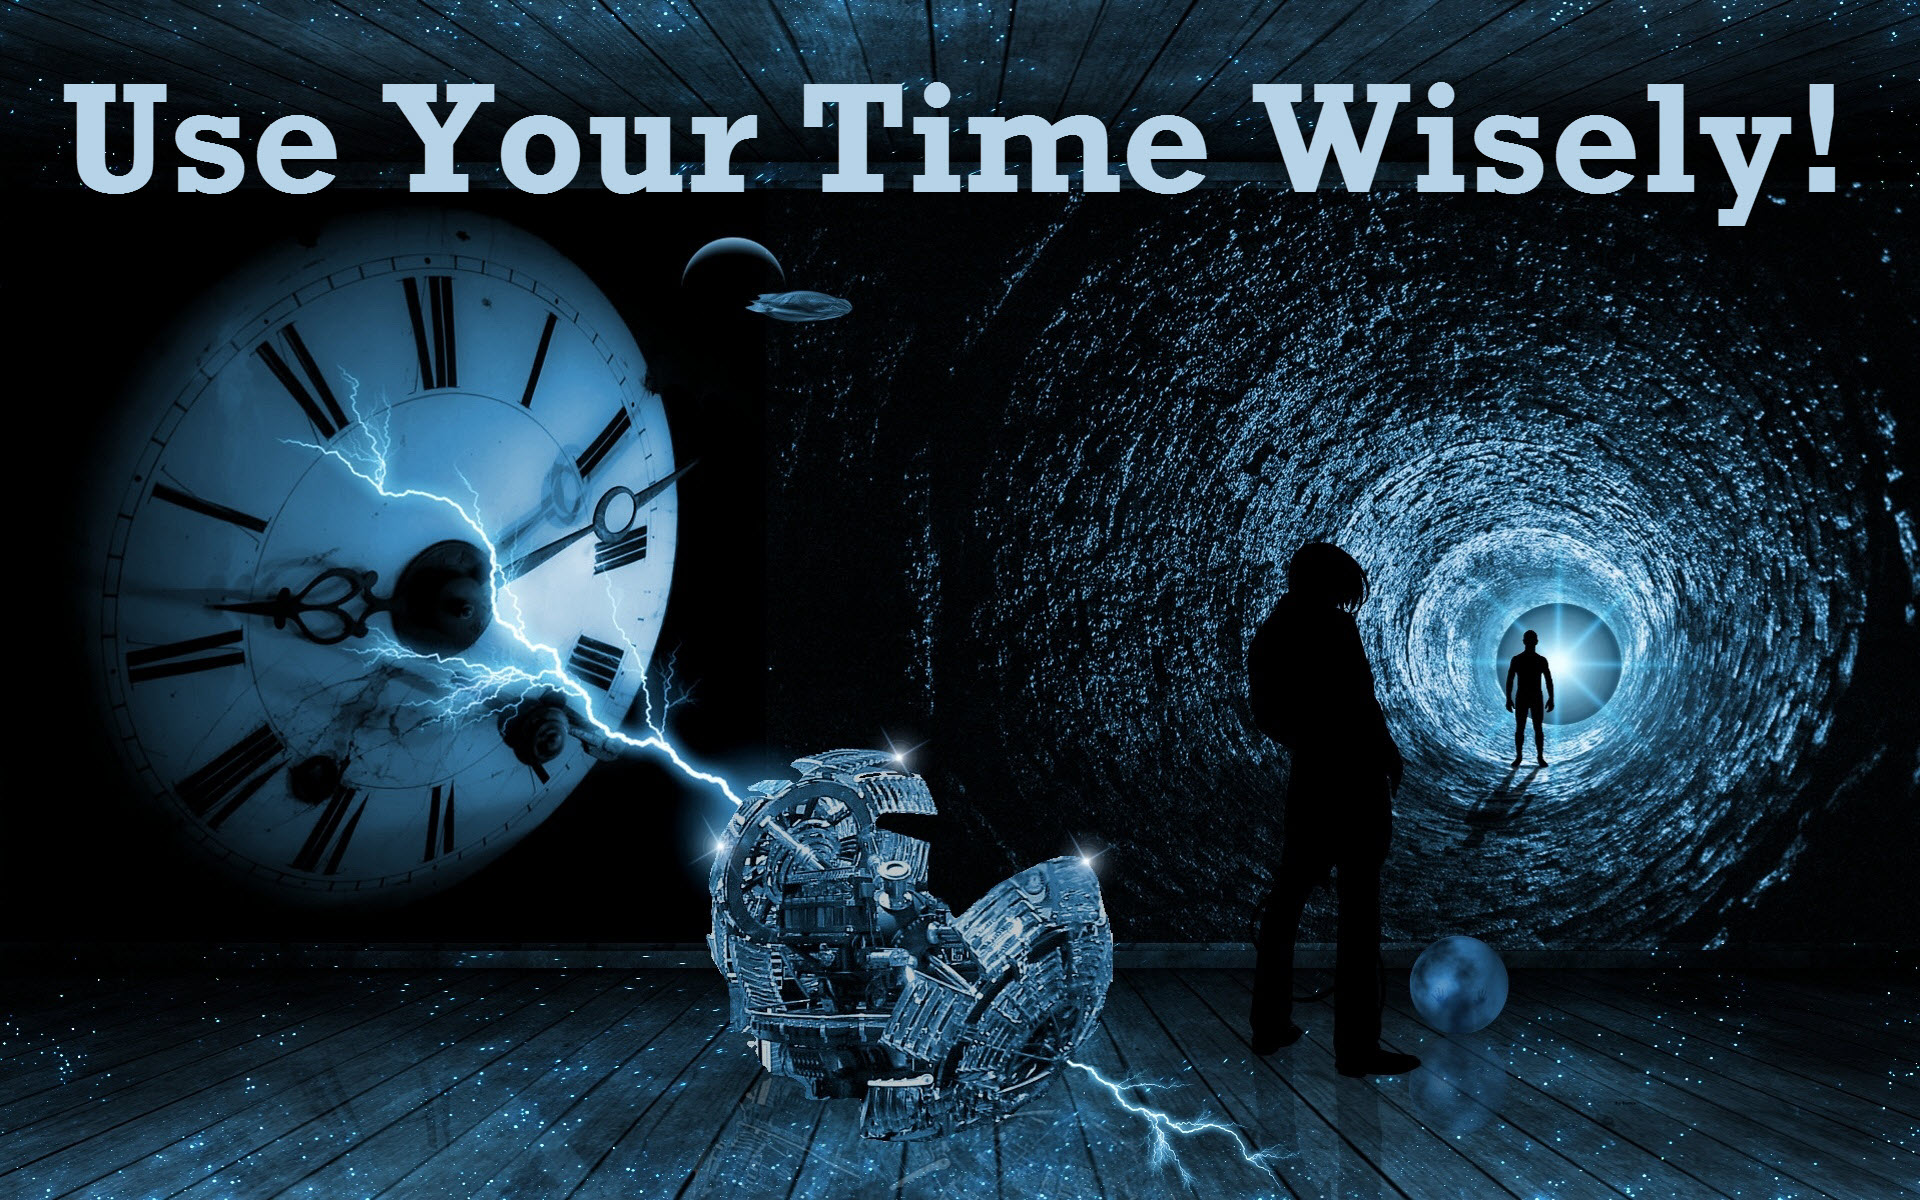 Use Your Time Wisely Quotes. QuotesGram